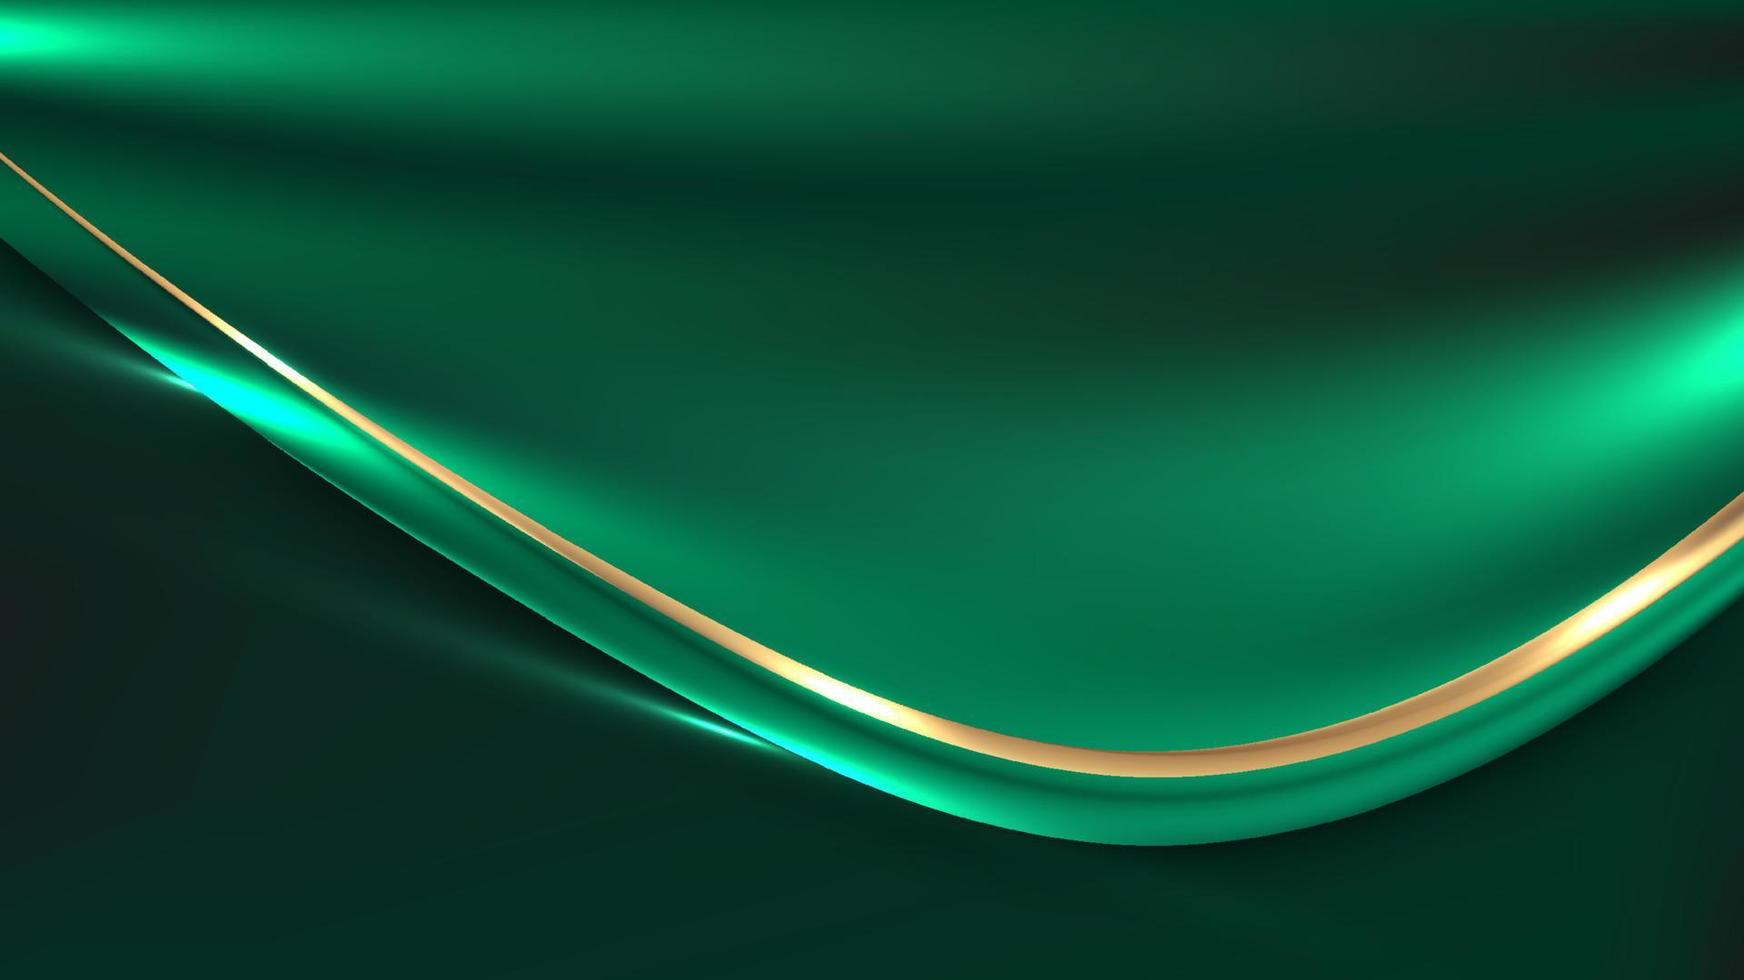 https://static.vecteezy.com/system/resources/previews/013/684/169/non_2x/abstract-luxury-green-fabric-satin-background-with-shiny-golden-line-with-lighting-effect-vector.jpg